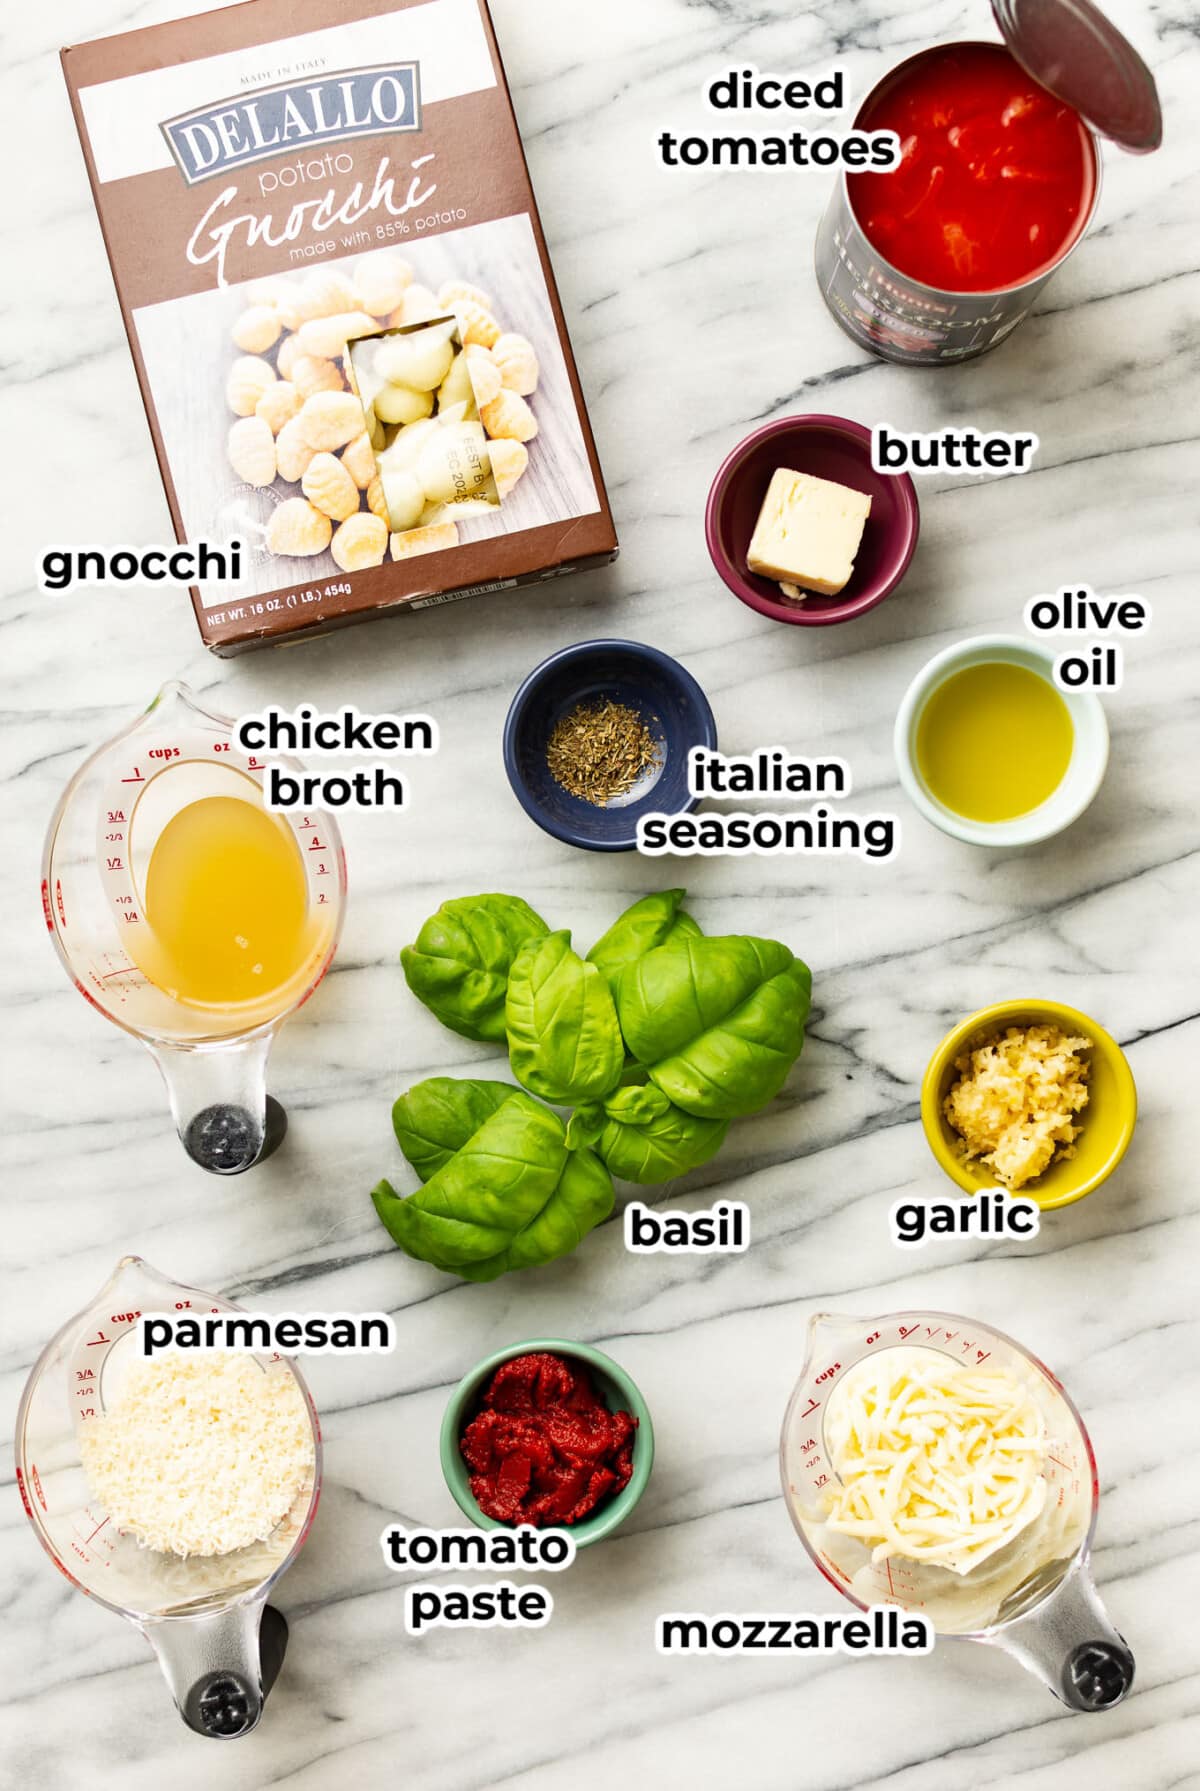 ingredients for gnocchi with tomato sauce